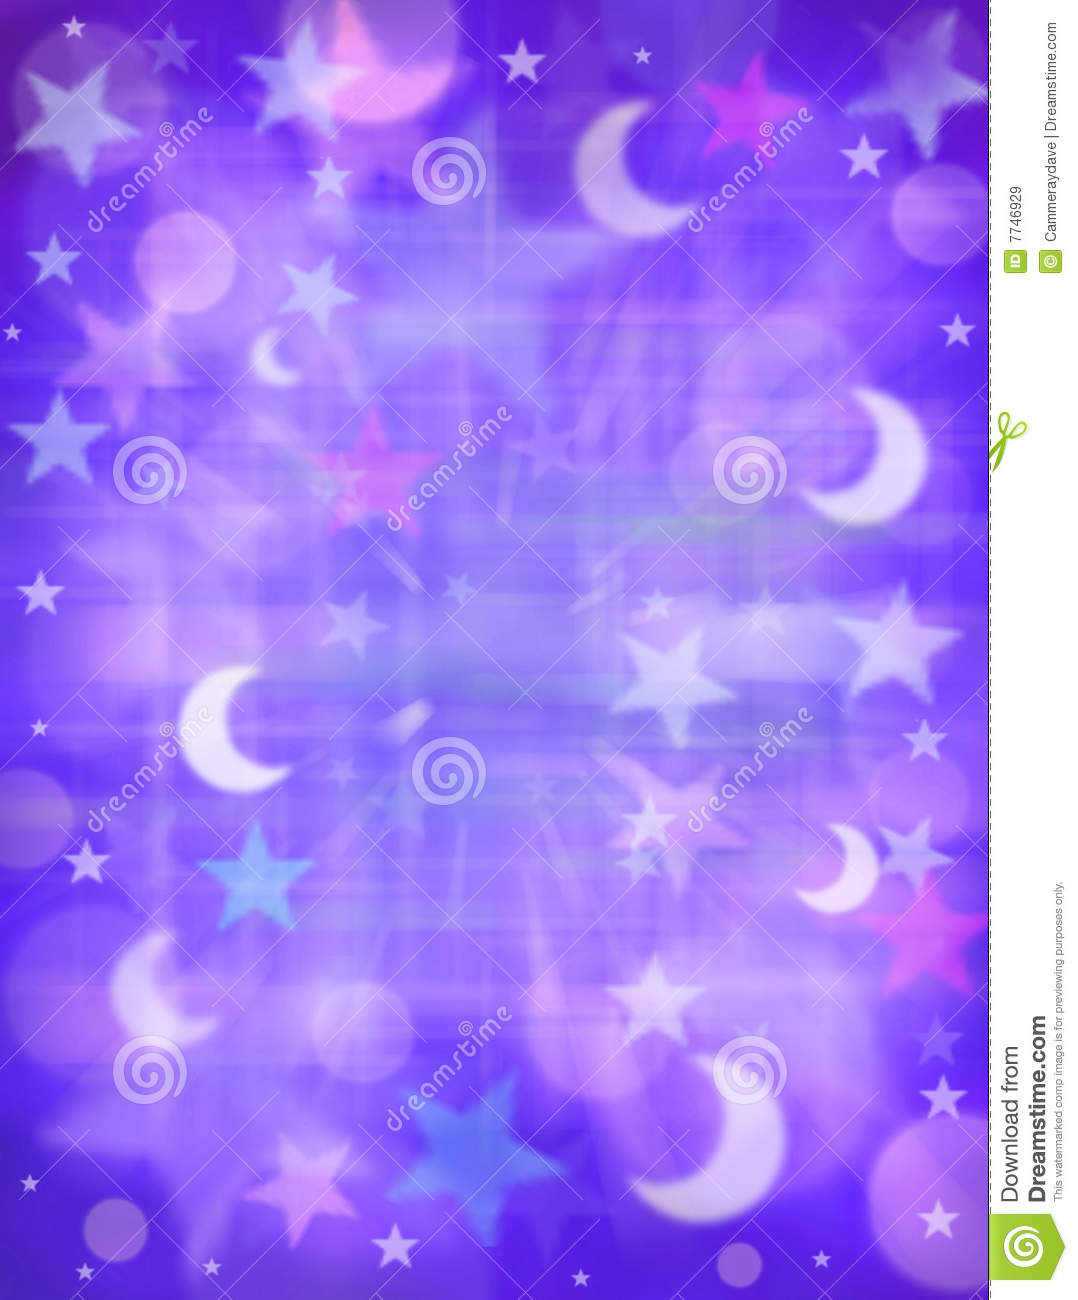 More Similar Stock Images Of   Abstract Stars Moon Dreams Background  